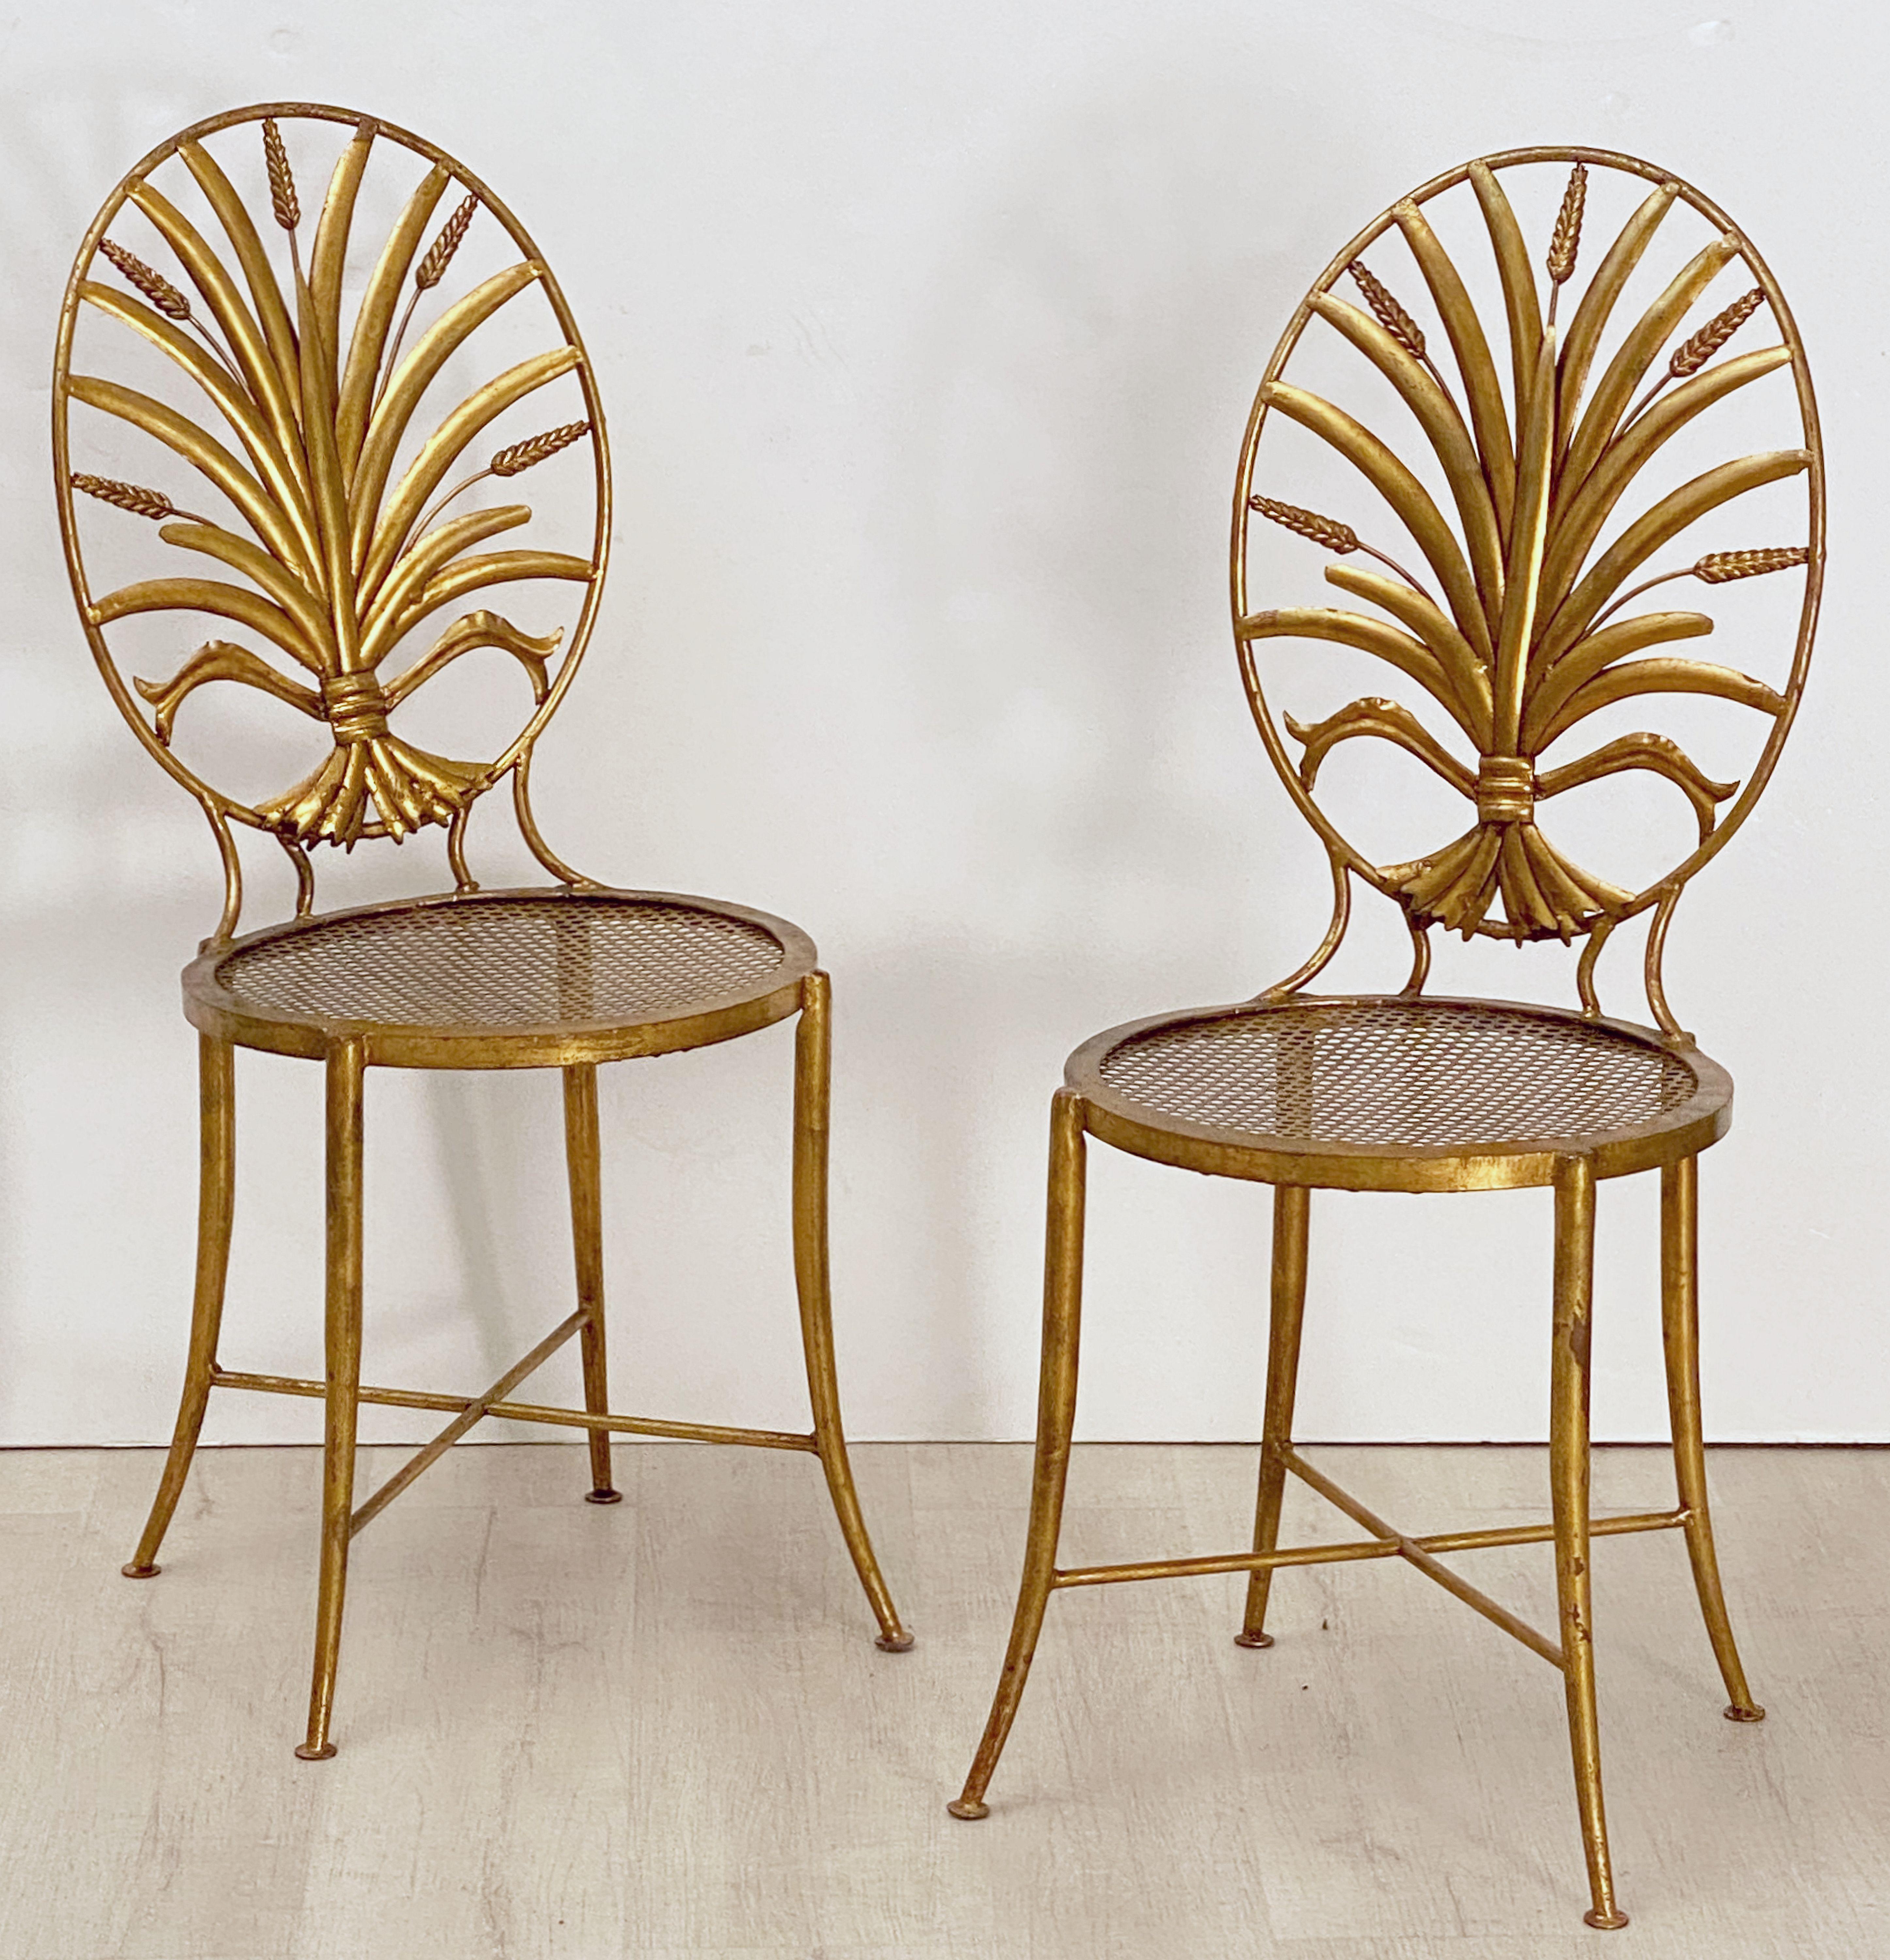 Hollywood Regency Italian Wheat Sheaf Cocktail Table and Chairs Set by S. Salvadori, Firenze